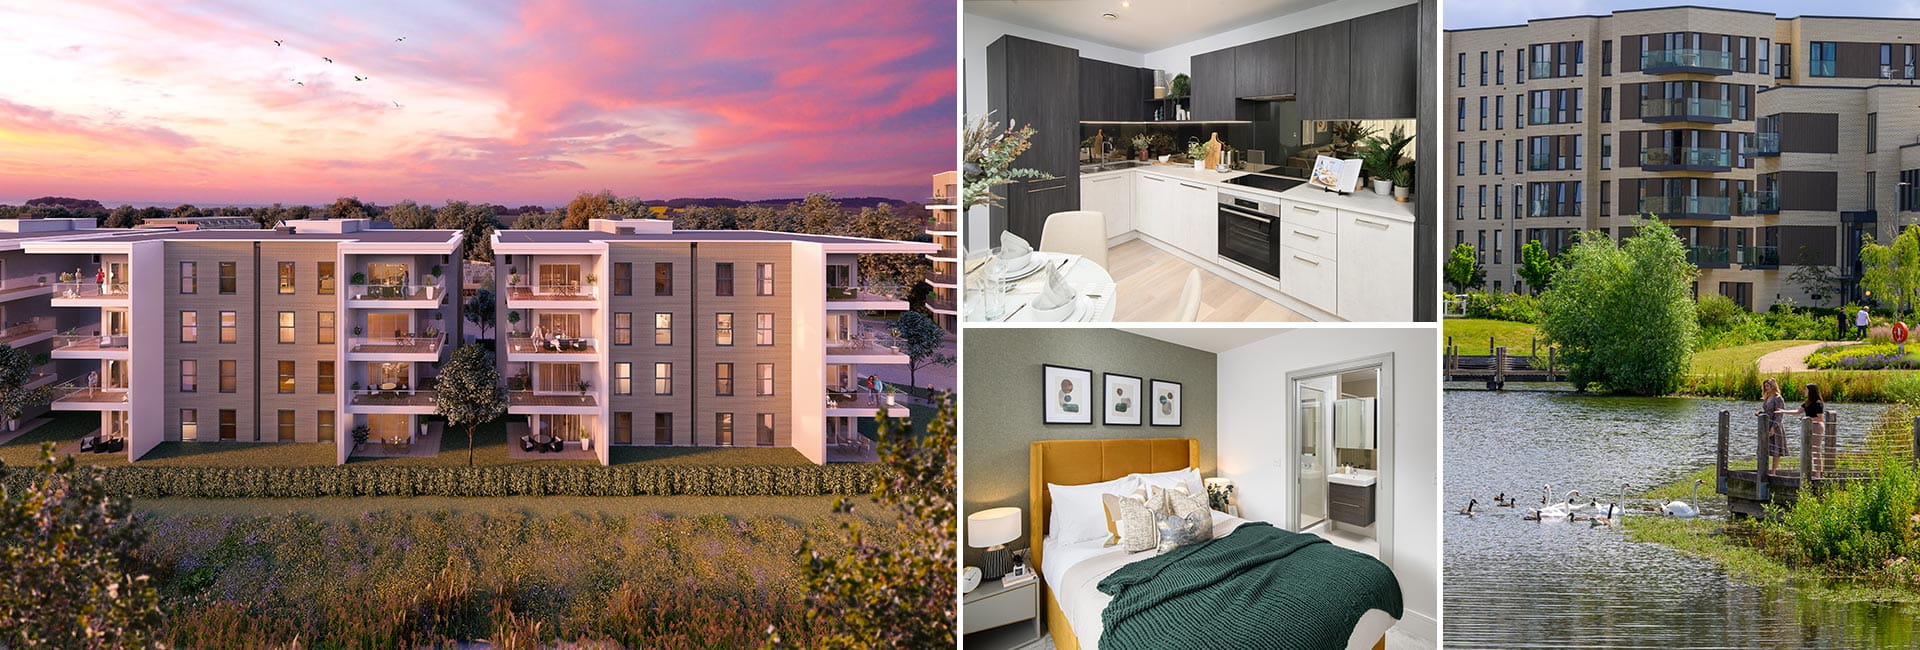 Montage of exterior and interior images at Green Park Village